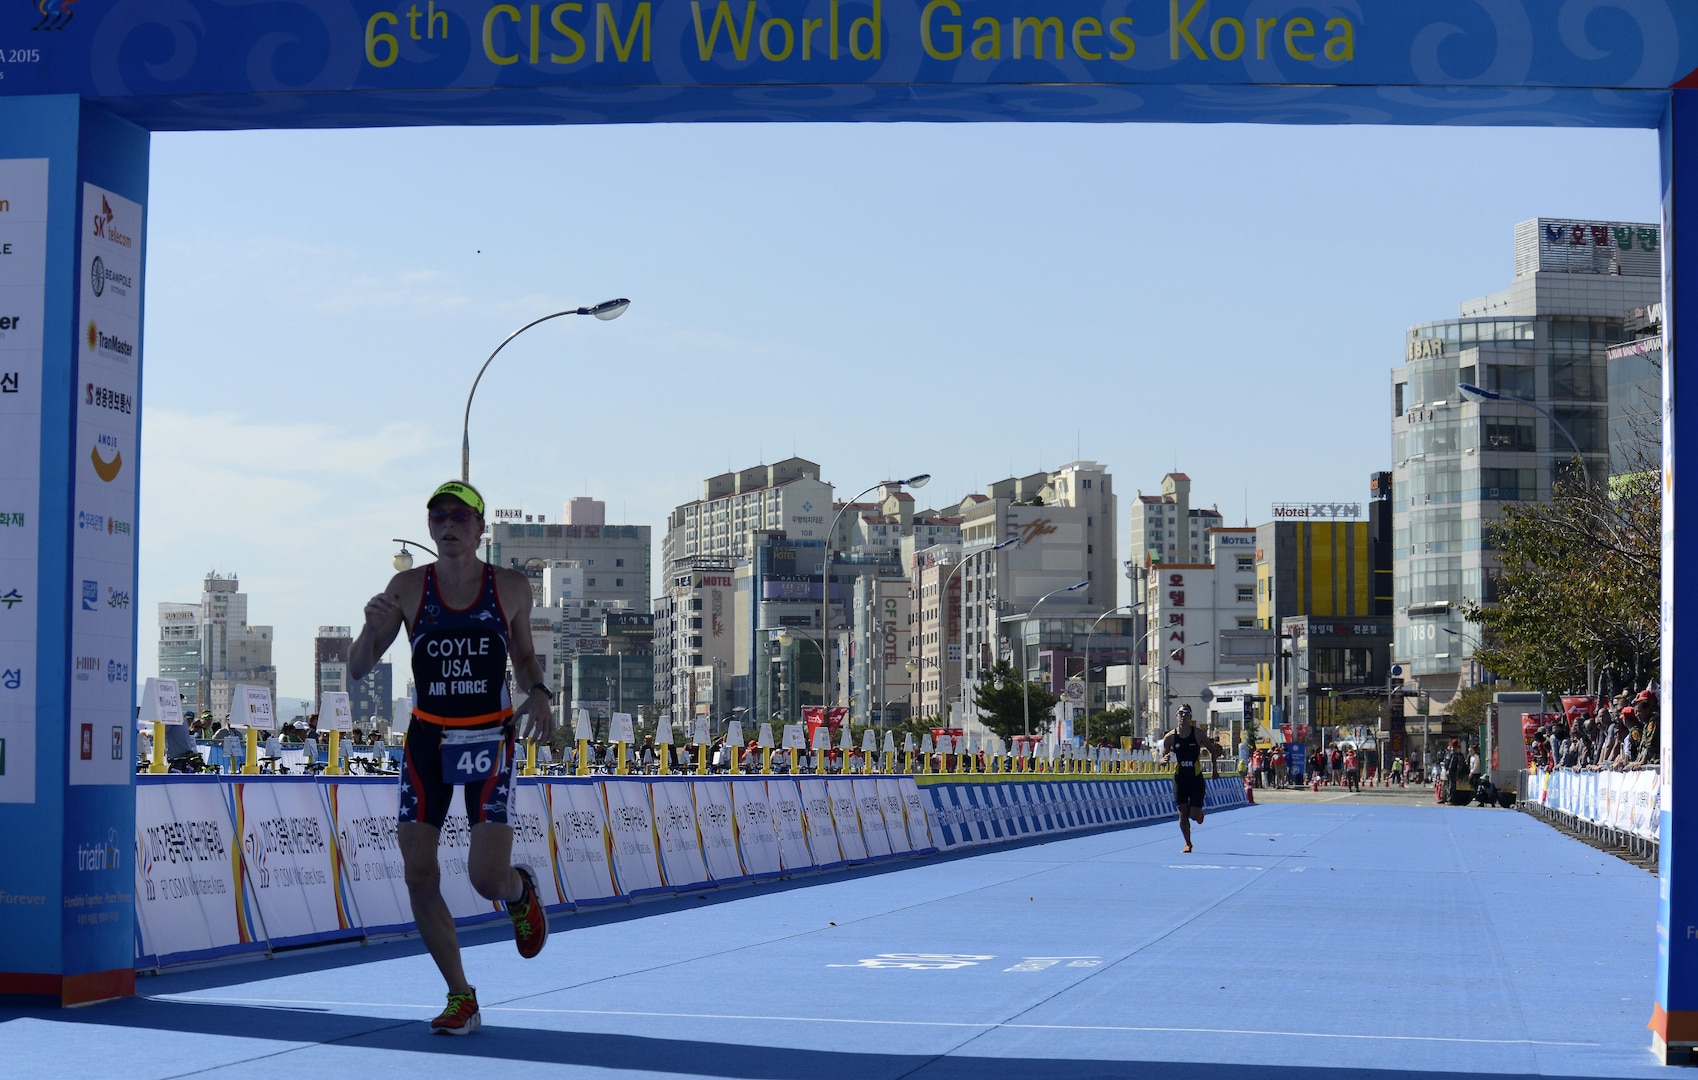 U.S. Air Force Maj. Judith Coyle crosses the finish line of the women's triathlon in downtown Pohang, South Korea, during the CISM World Games Oct. 10, 2015. Coyle earned bronze for the USA in the seniors division with an overall time of two hours, 15 minutes and  27.69 seconds.